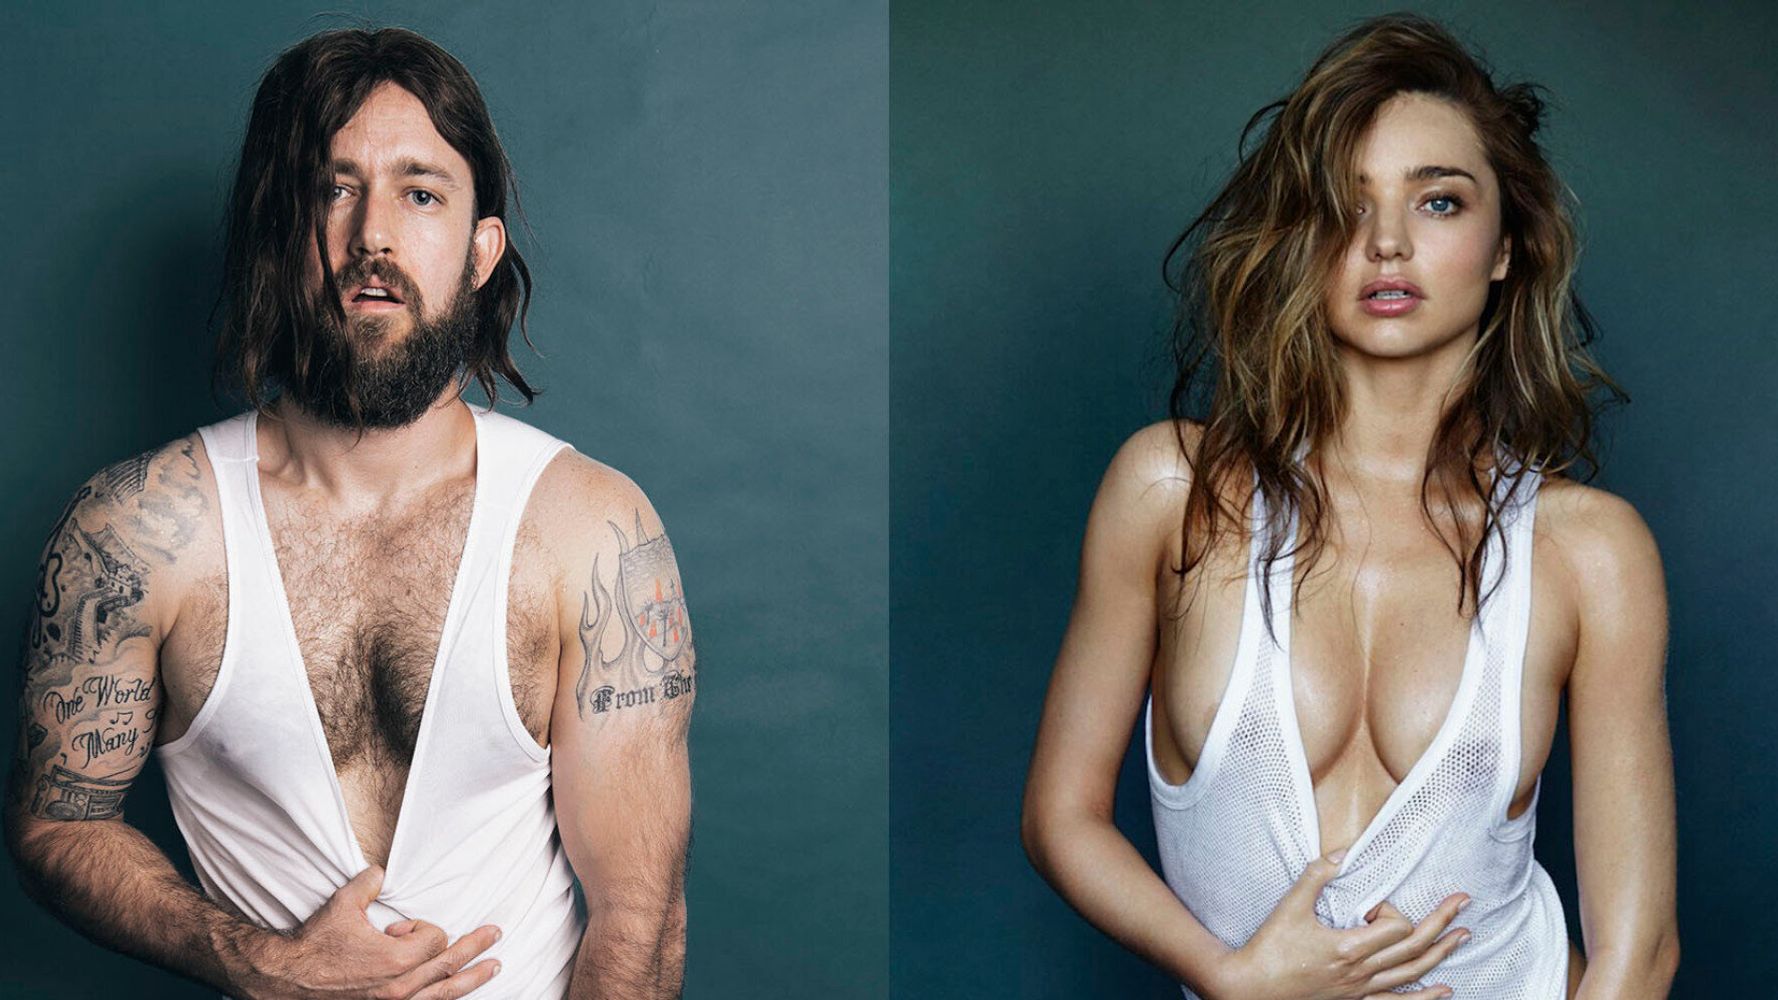 Miranda Kerr's GQ Shoot Recreated By A Man, And It's Weird And  Thought-Provoking | HuffPost UK News